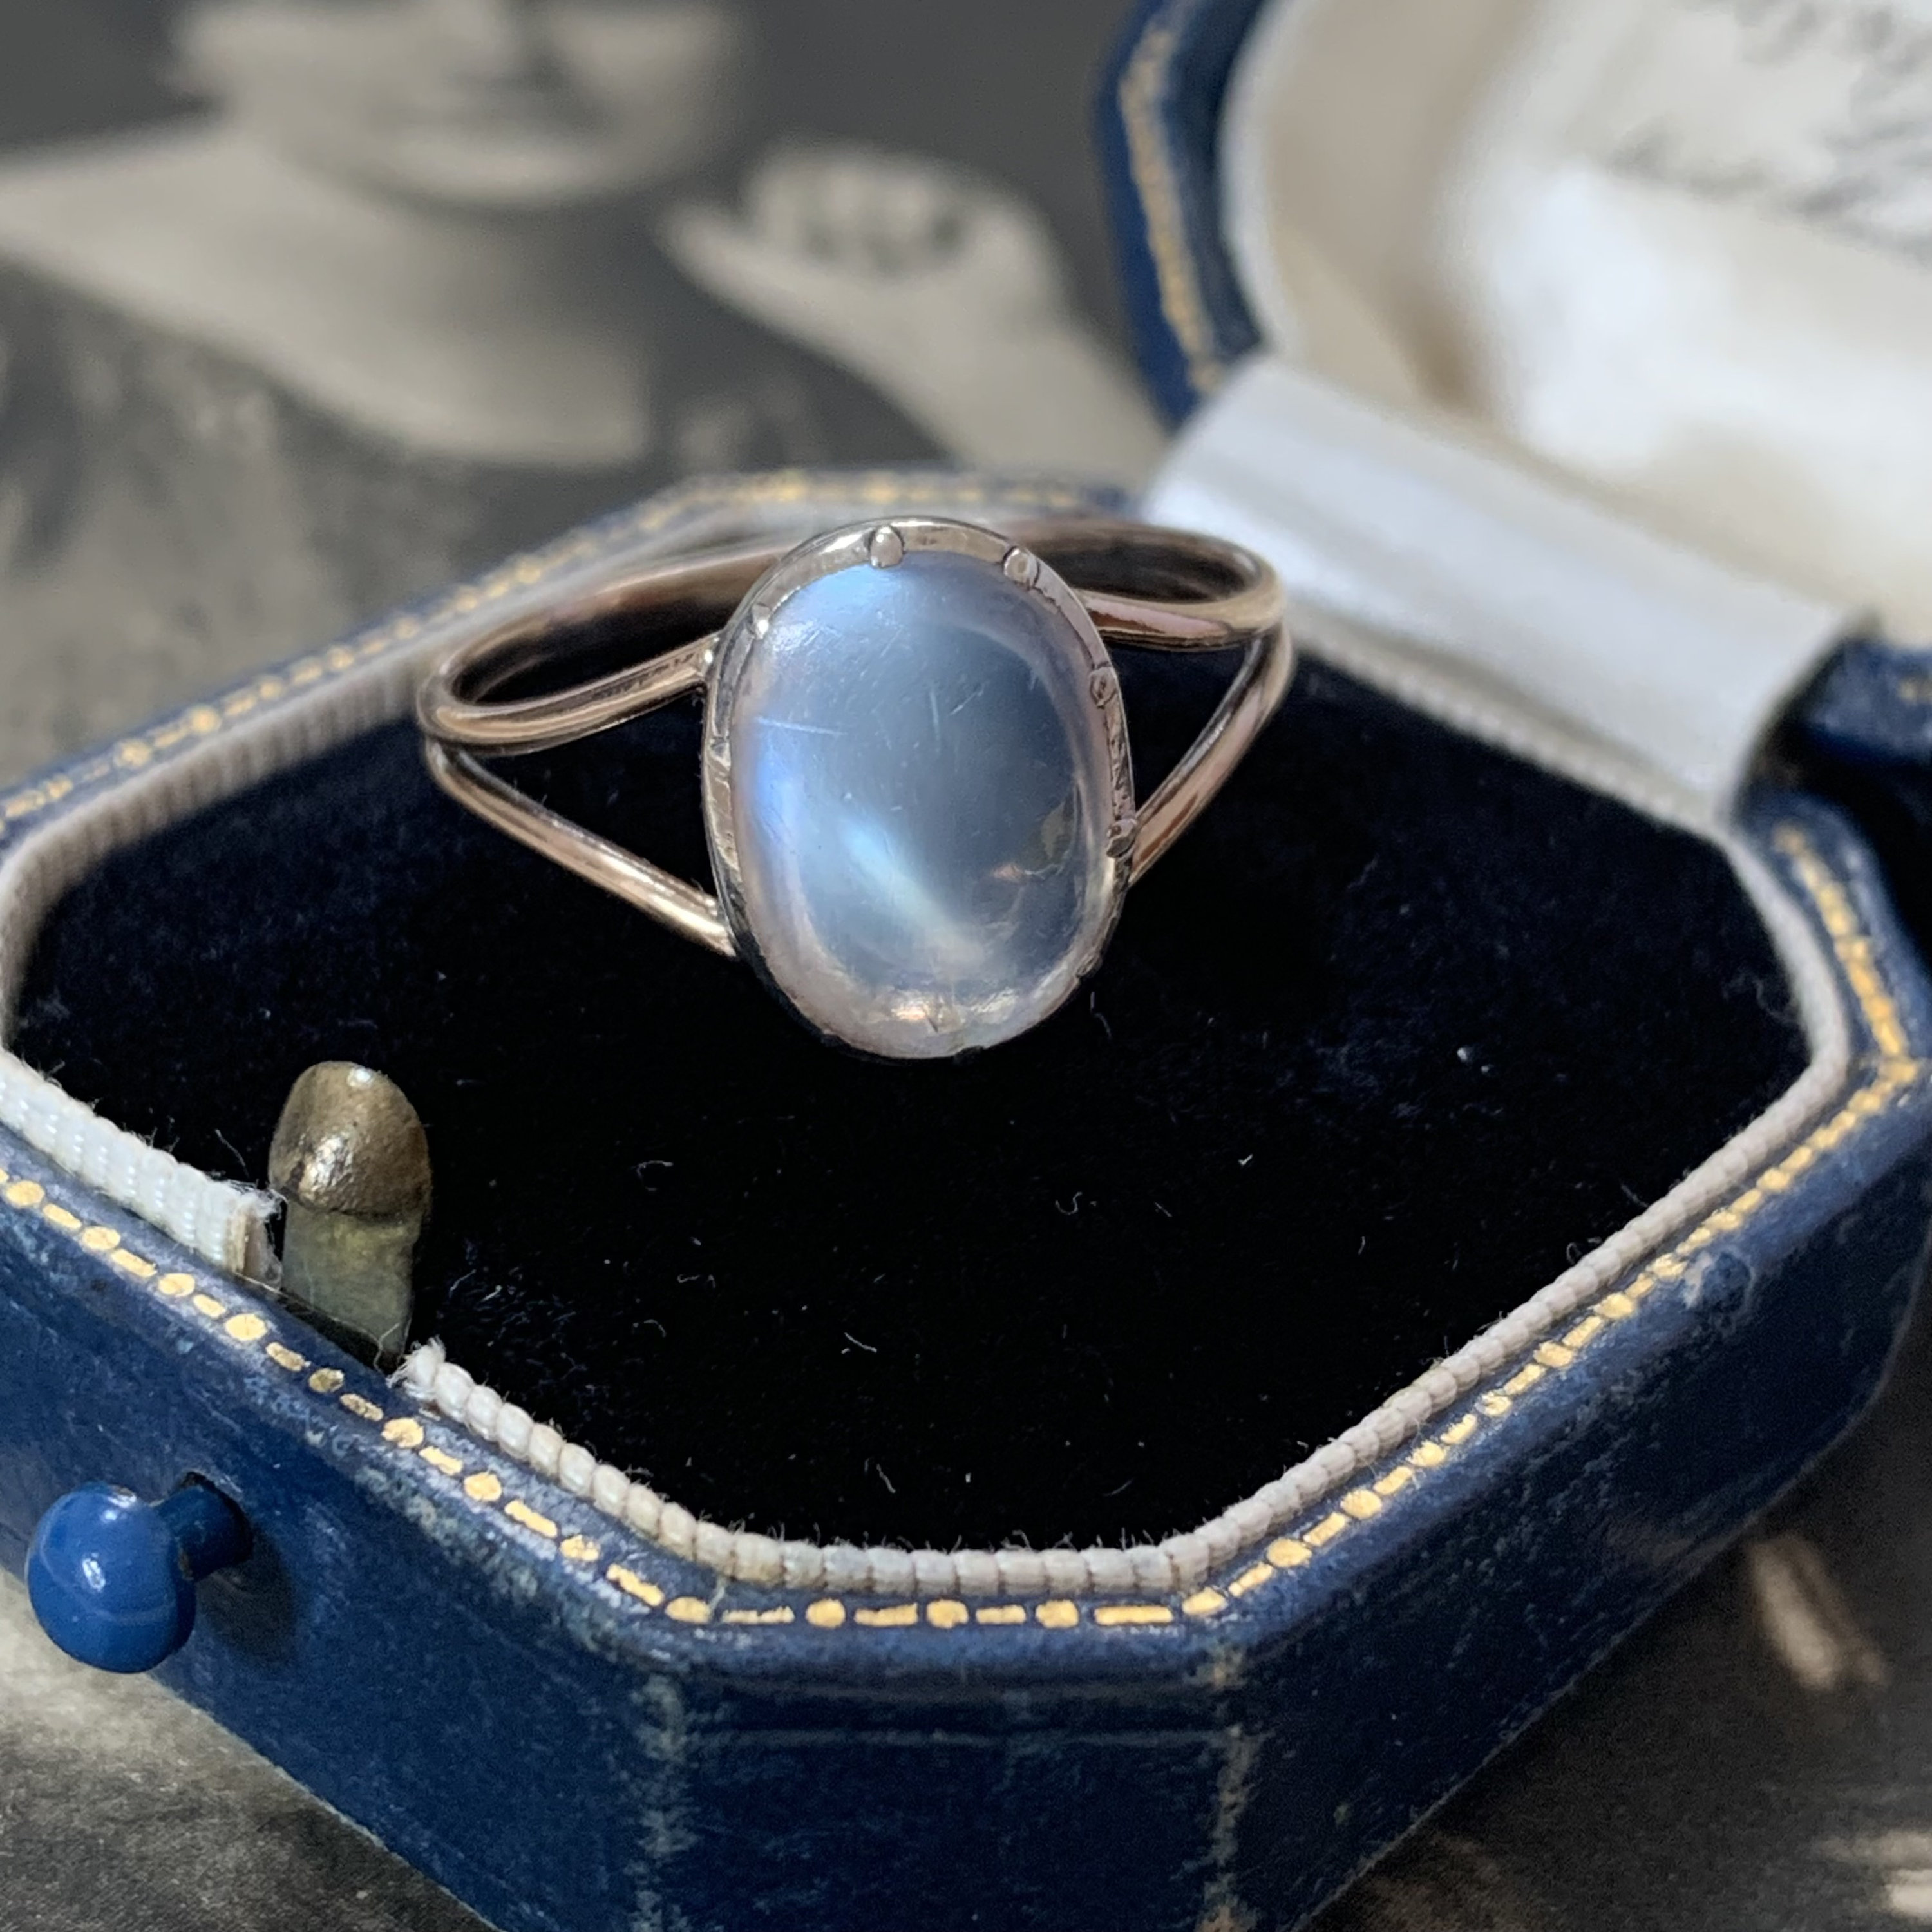 Victorian Moonstone Ring Is A Truly Extraordinary Antique Solitaire That Transports Us To Bygone Era Set in 15Ct Gold & Silver